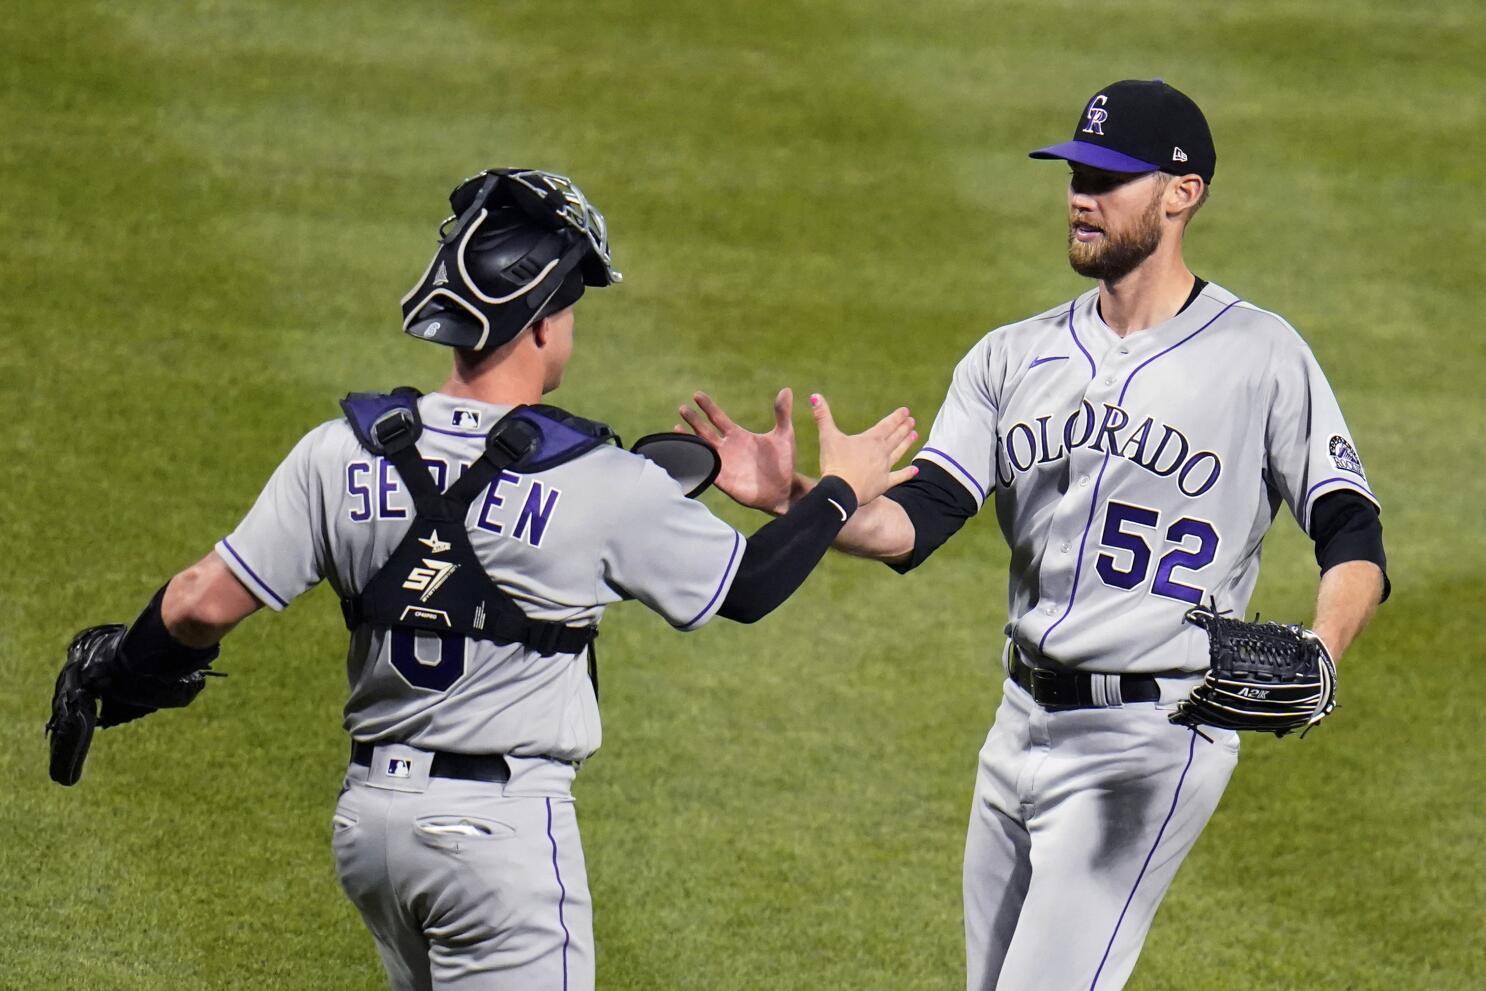 Joe's 10th-inning single gives Rockies 2-1 win over Pirates - The